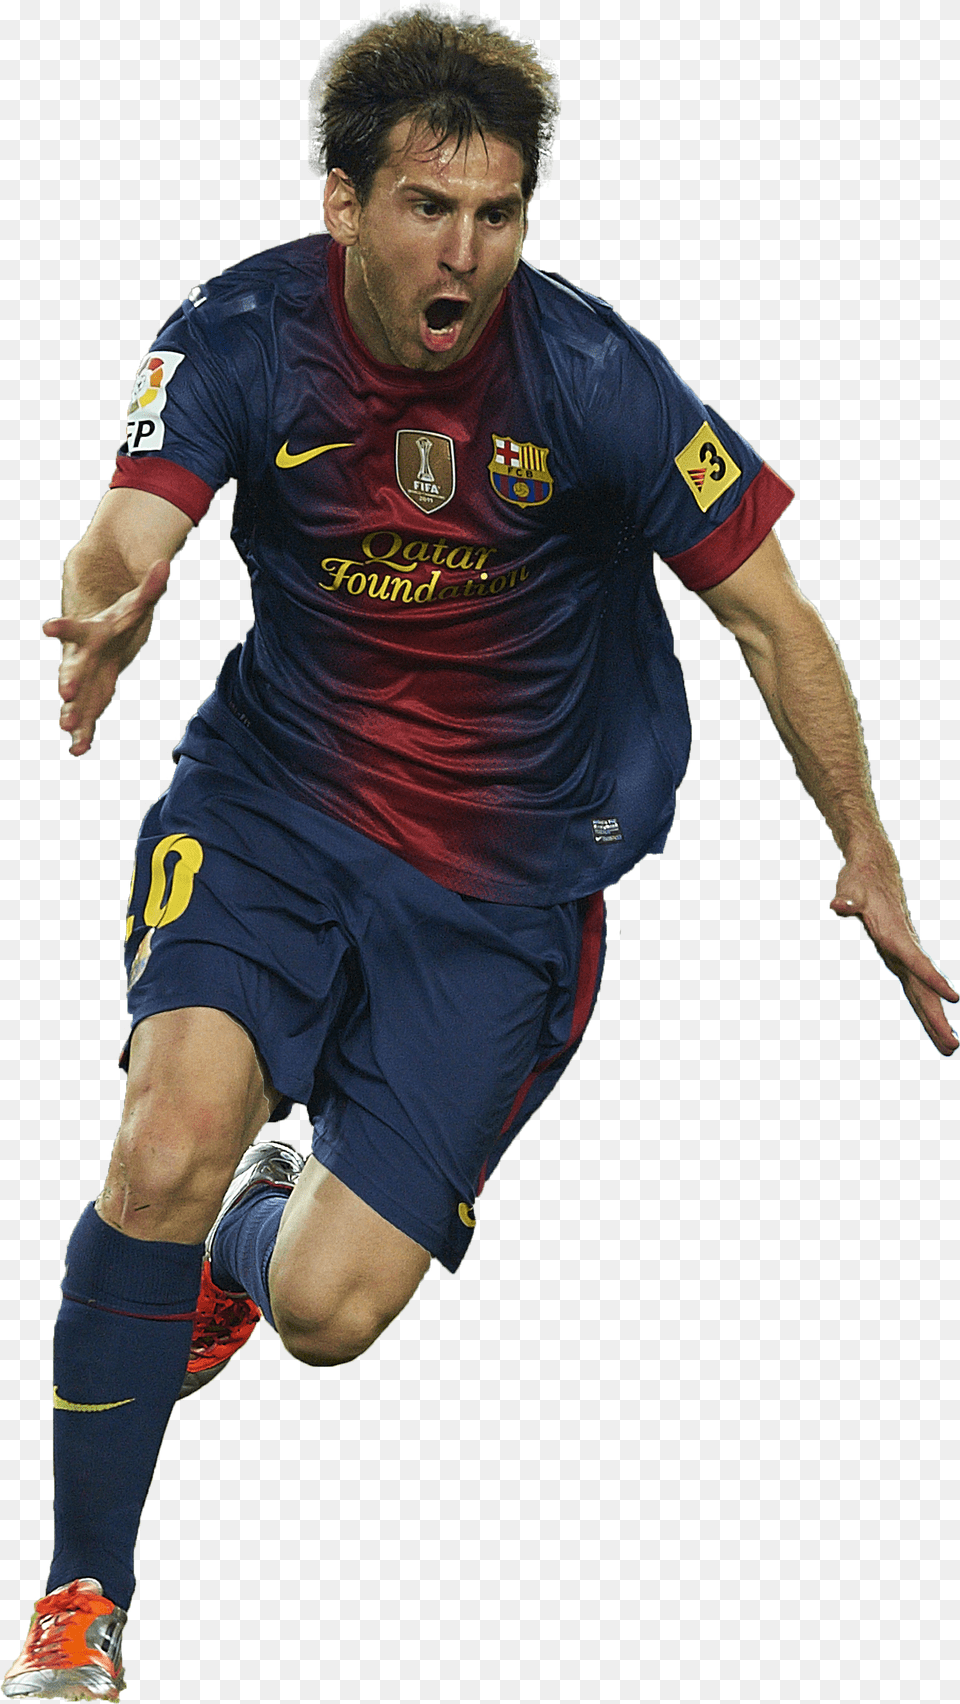 Wallpapers V Lionel Messi Free Png